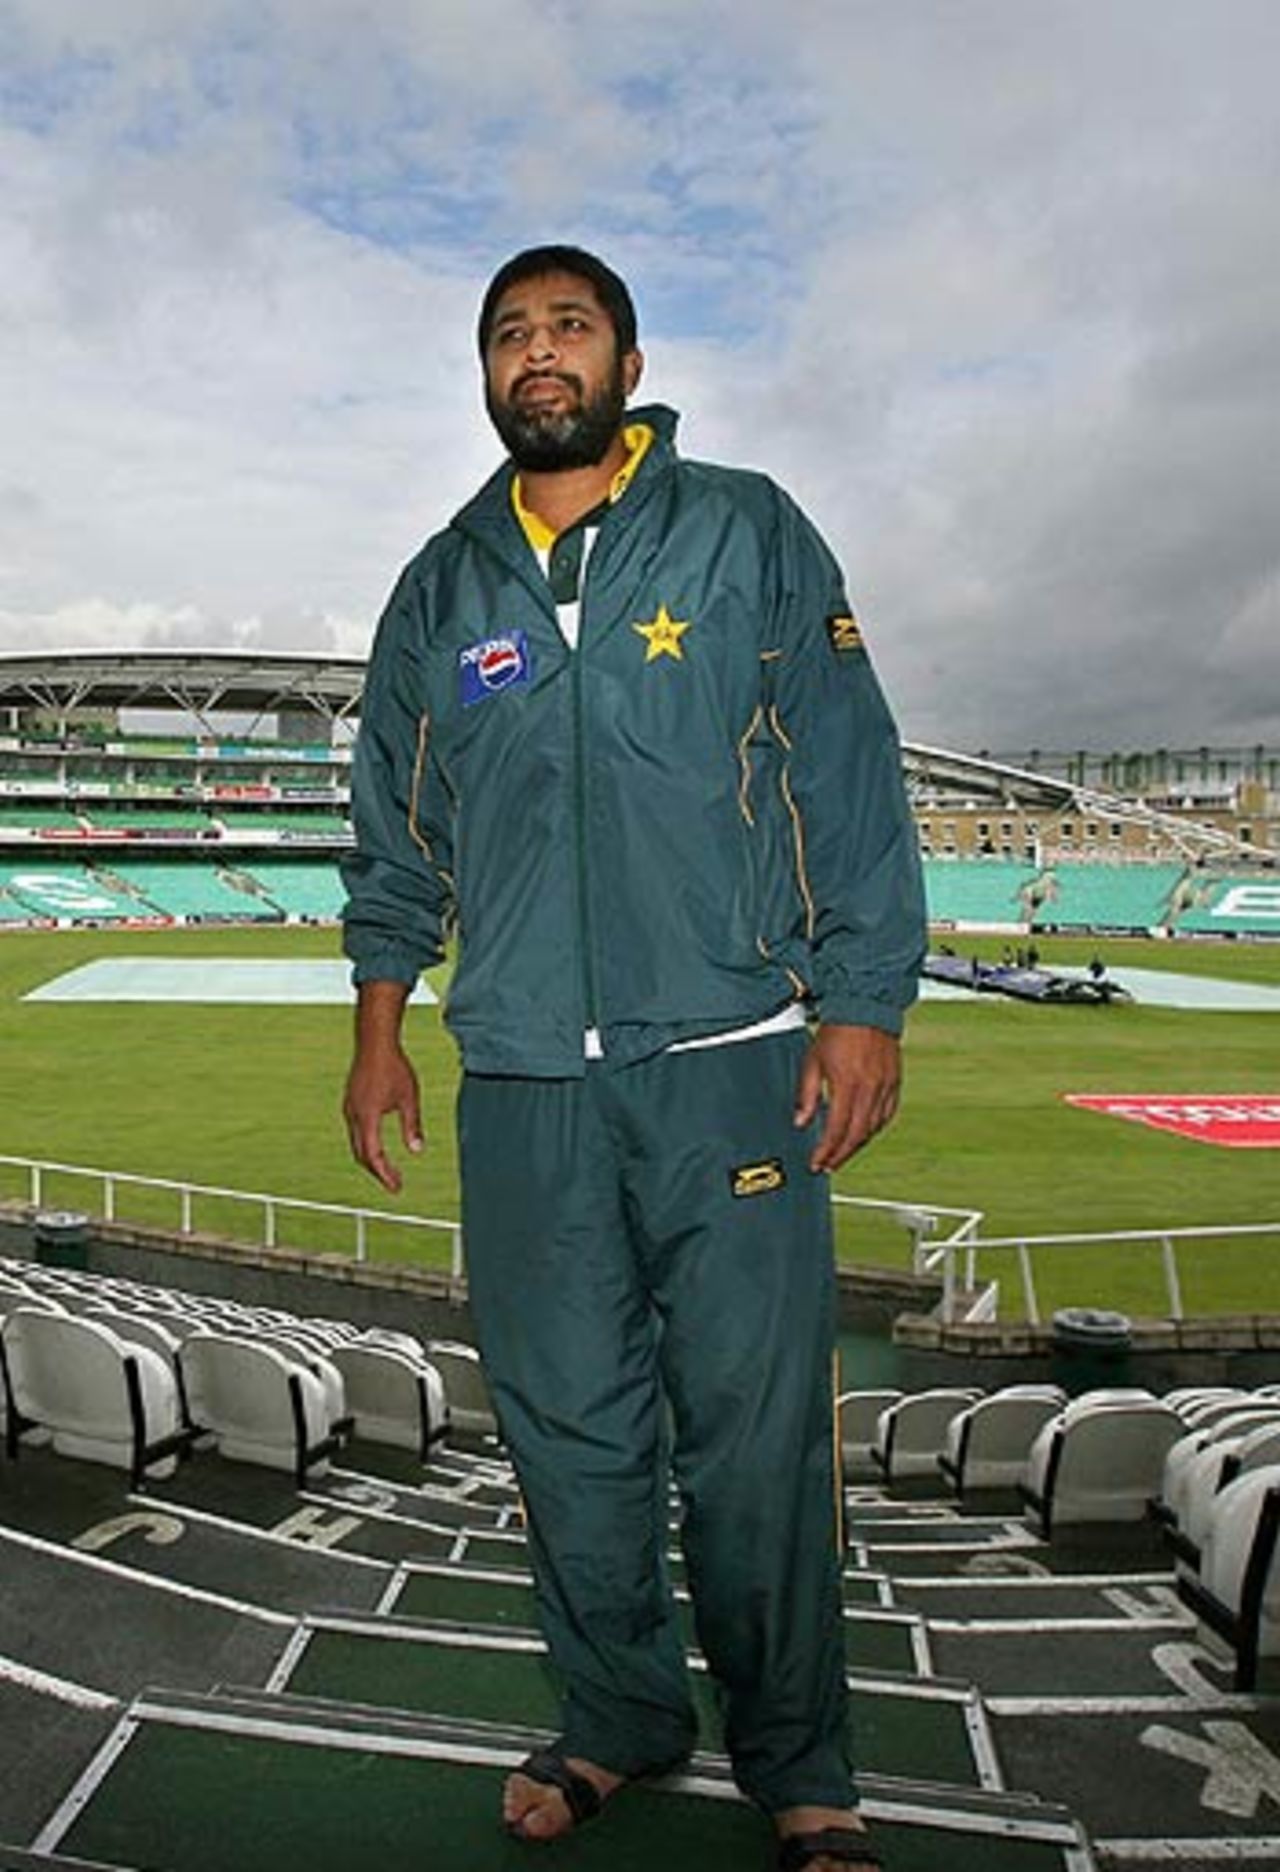 Inzamam-ul-Haq returned to The Oval a day after the forfeiture to collect his kit, England v Pakistan, 4th Test, The Oval, August 21, 2006